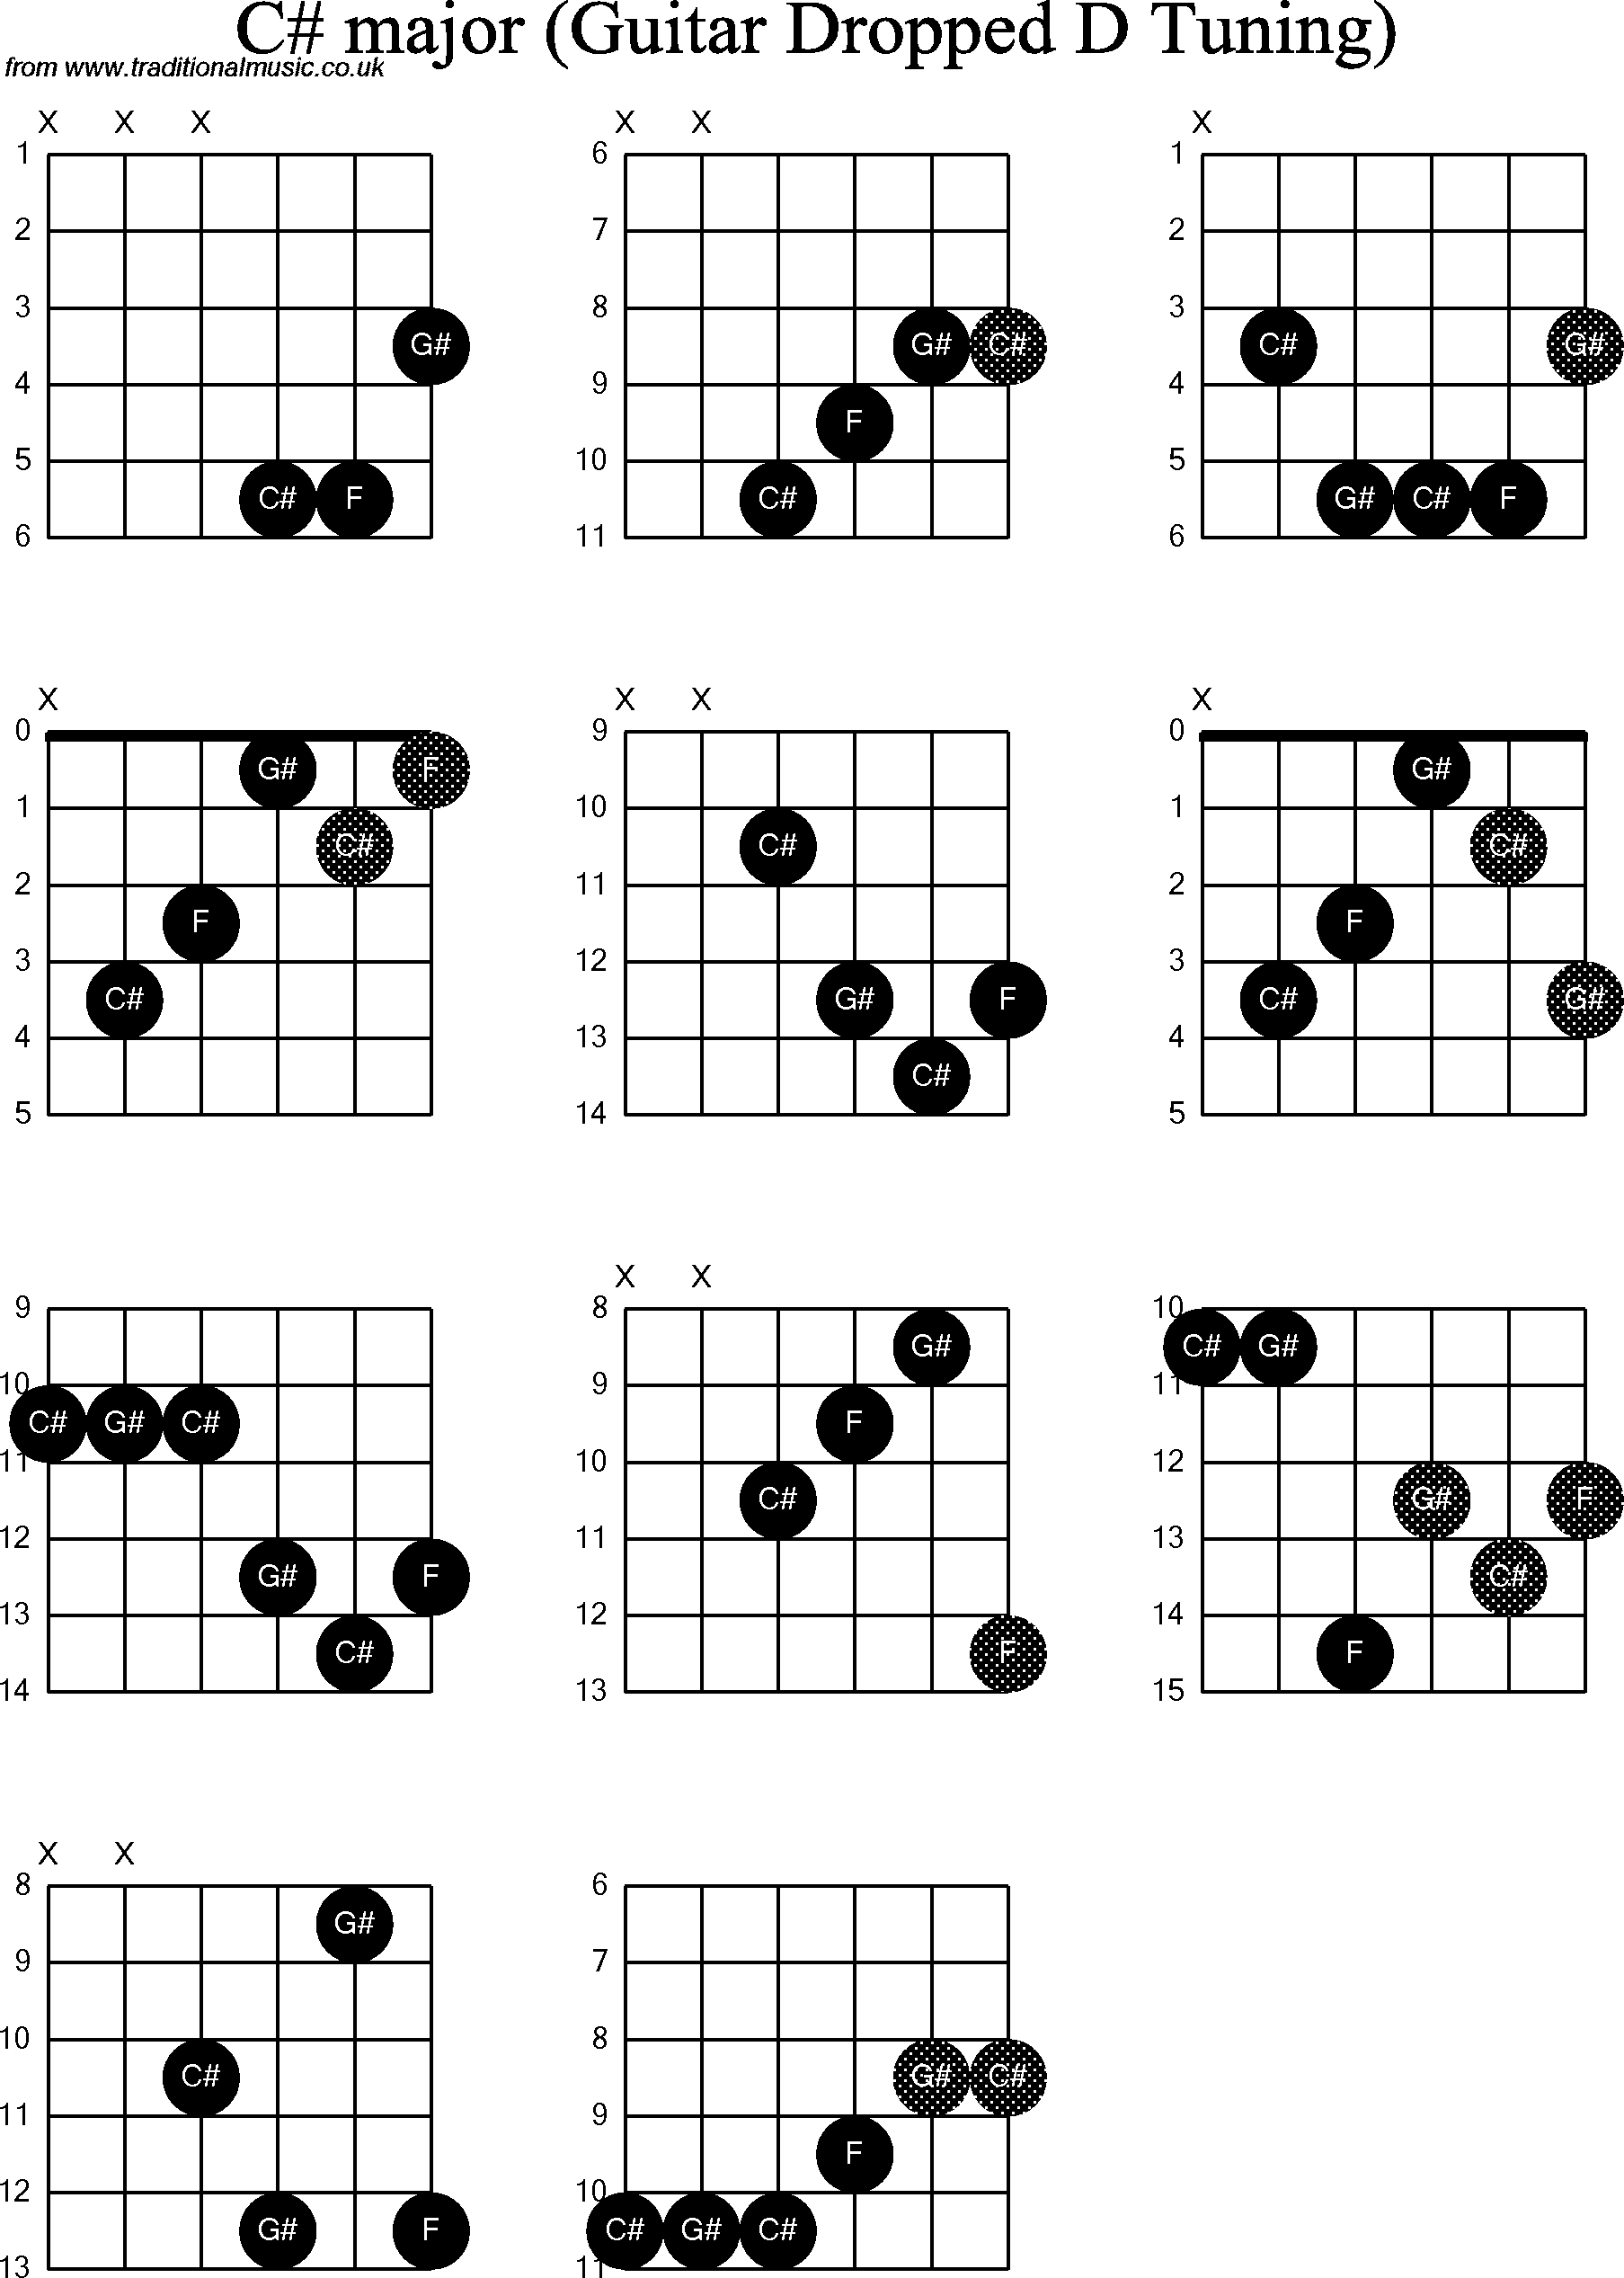 Chord diagrams for dropped D Guitar(DADGBE), C Sharp